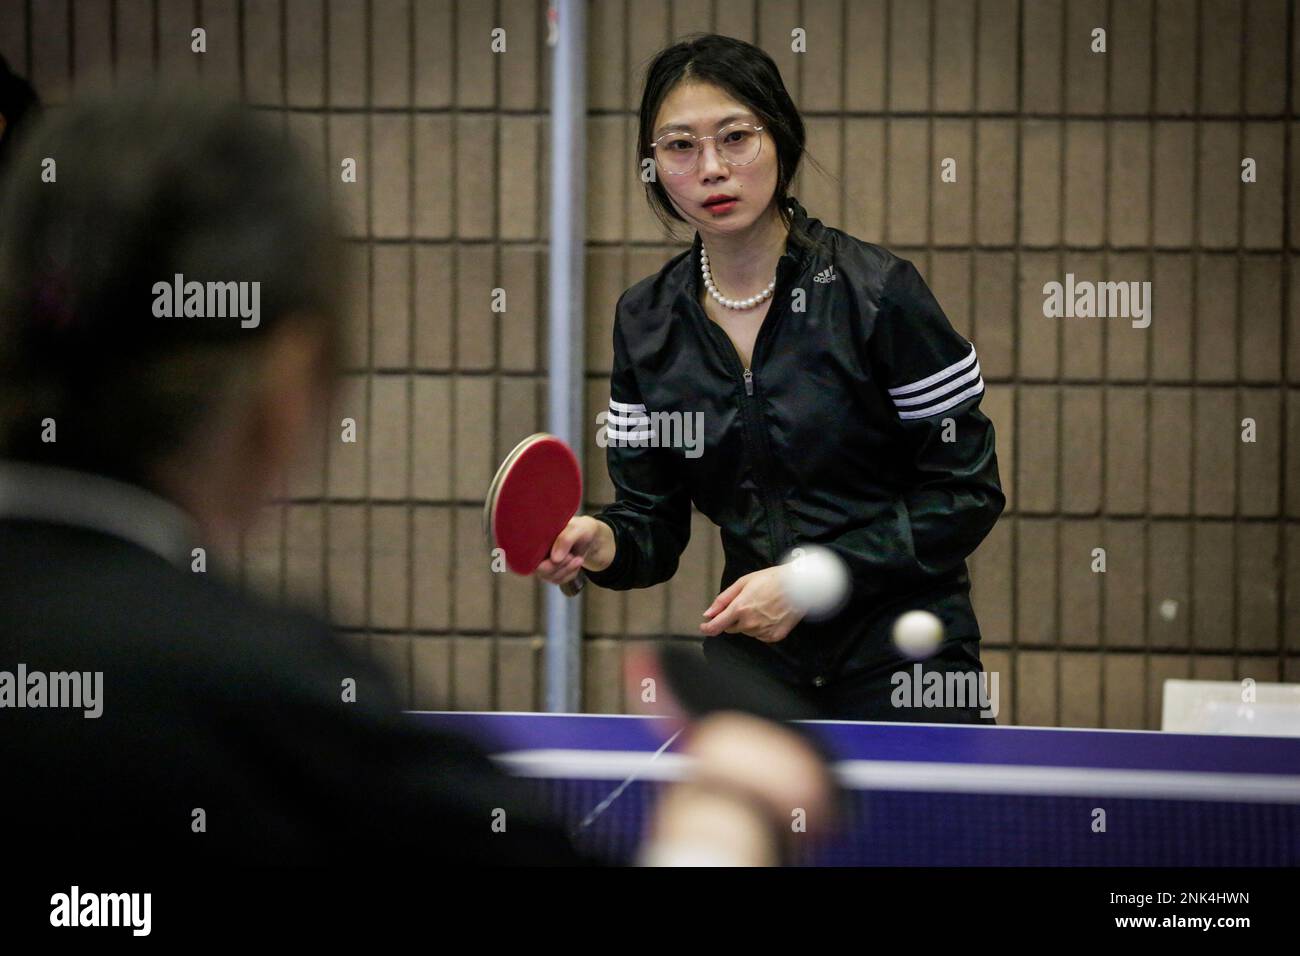 Erin Luan, 29, plays ping pong at the Willy "Woo Woo" Wong Recreation  Center during the annual Chinatown ping-pong festival in San Francisco,  Calif., on Sunday, Aug. 20, 2017. (Gabrielle Lurie/San Francisco